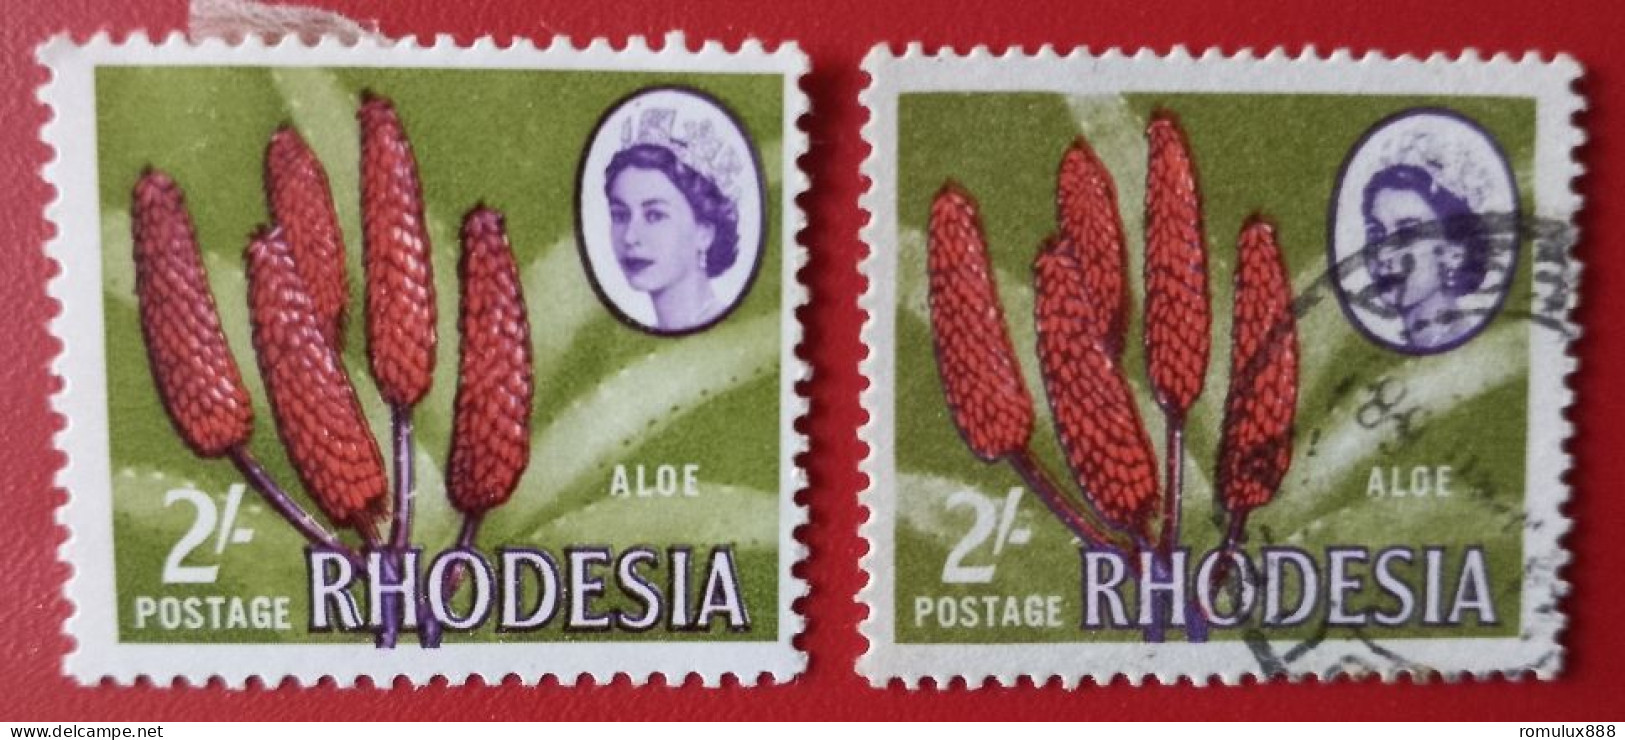 RHODESIA SACC 140-2 SHILLINGS X2 MH/USE WITH FLAW SHIFT OF FLOWER INTO MARGINS - Rhodesië (1964-1980)